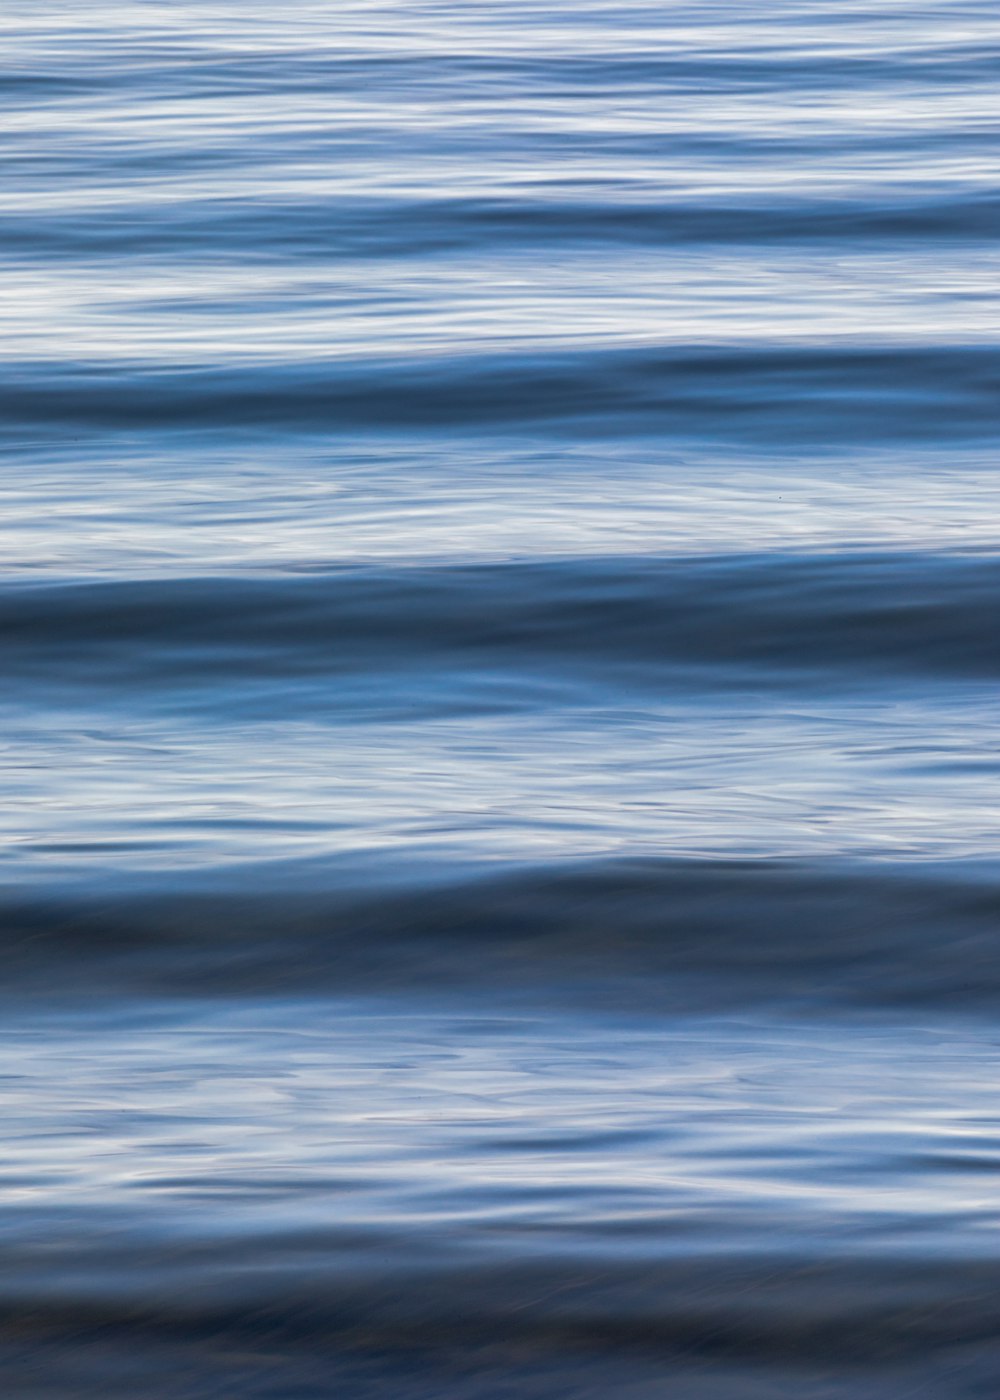 a close-up of a blue surface